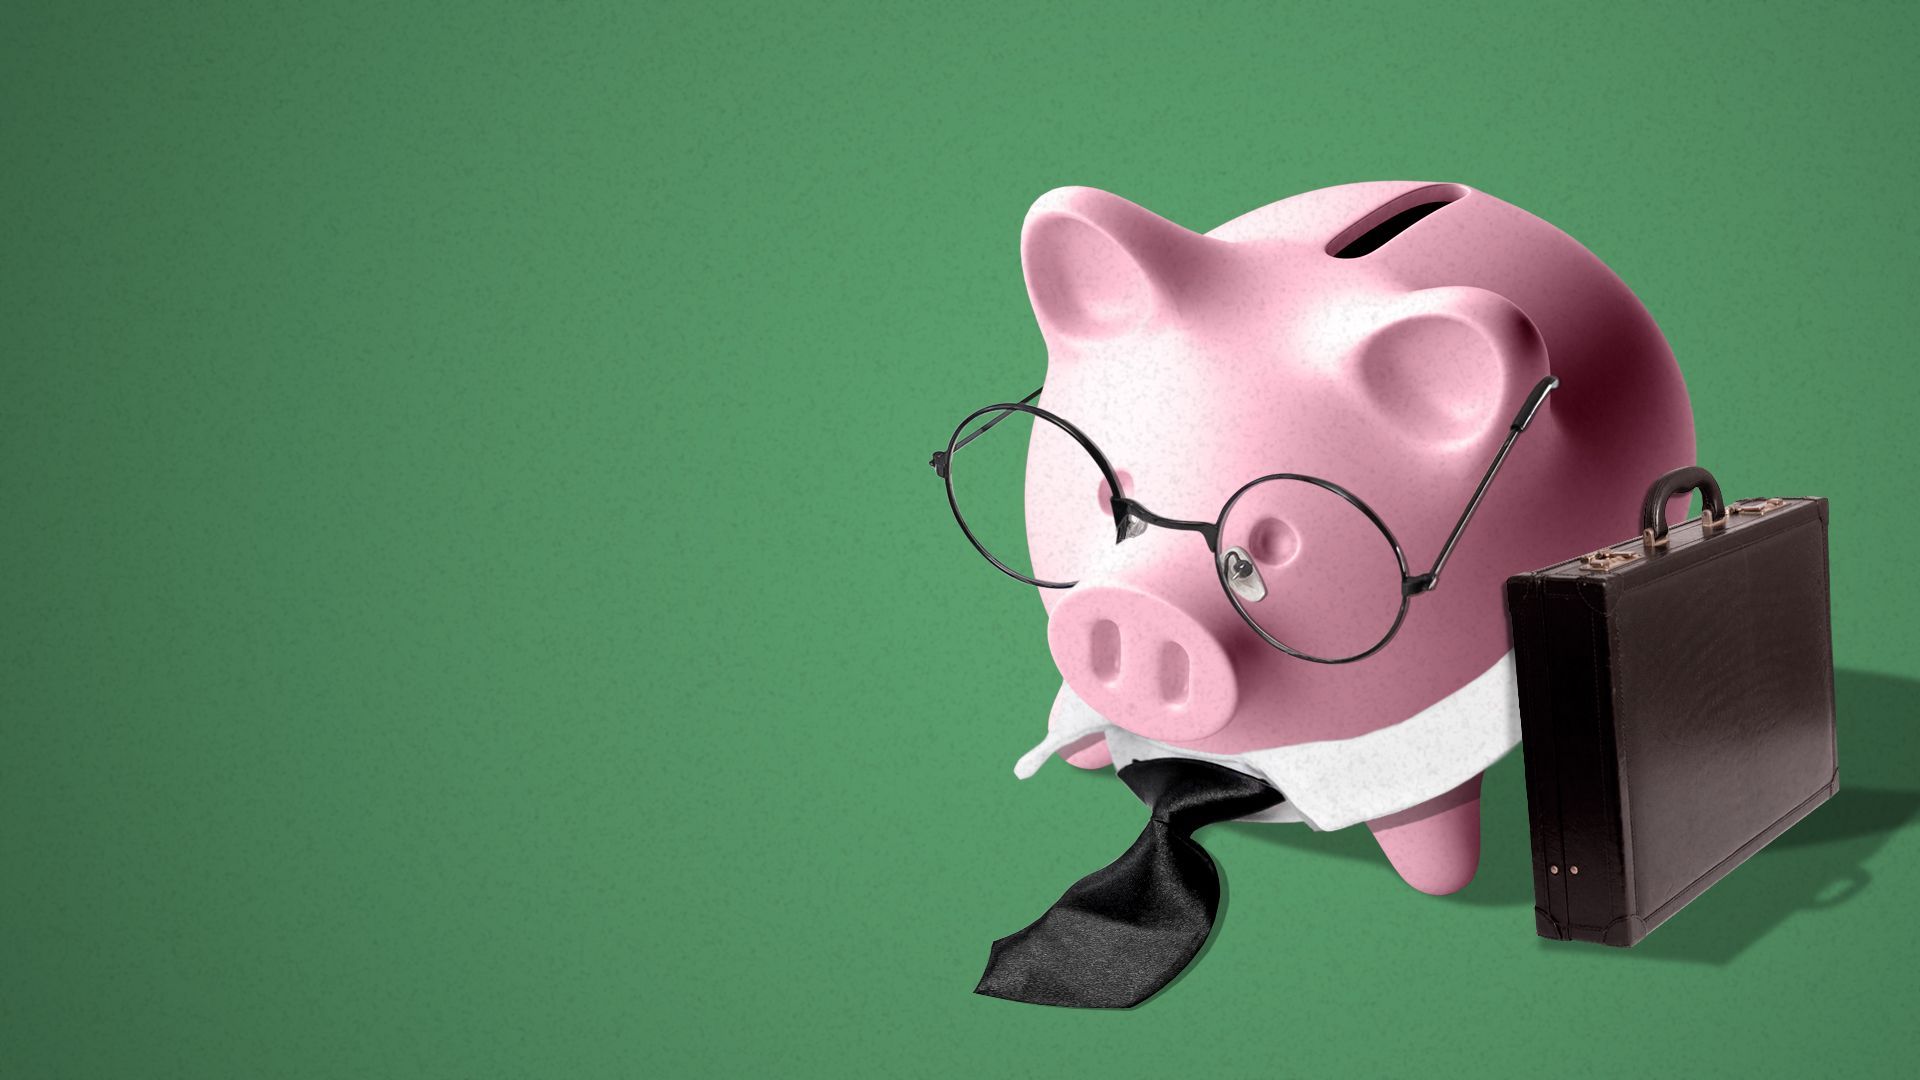 Illustration of a piggy bank with glasses, a business tie and briefcase.